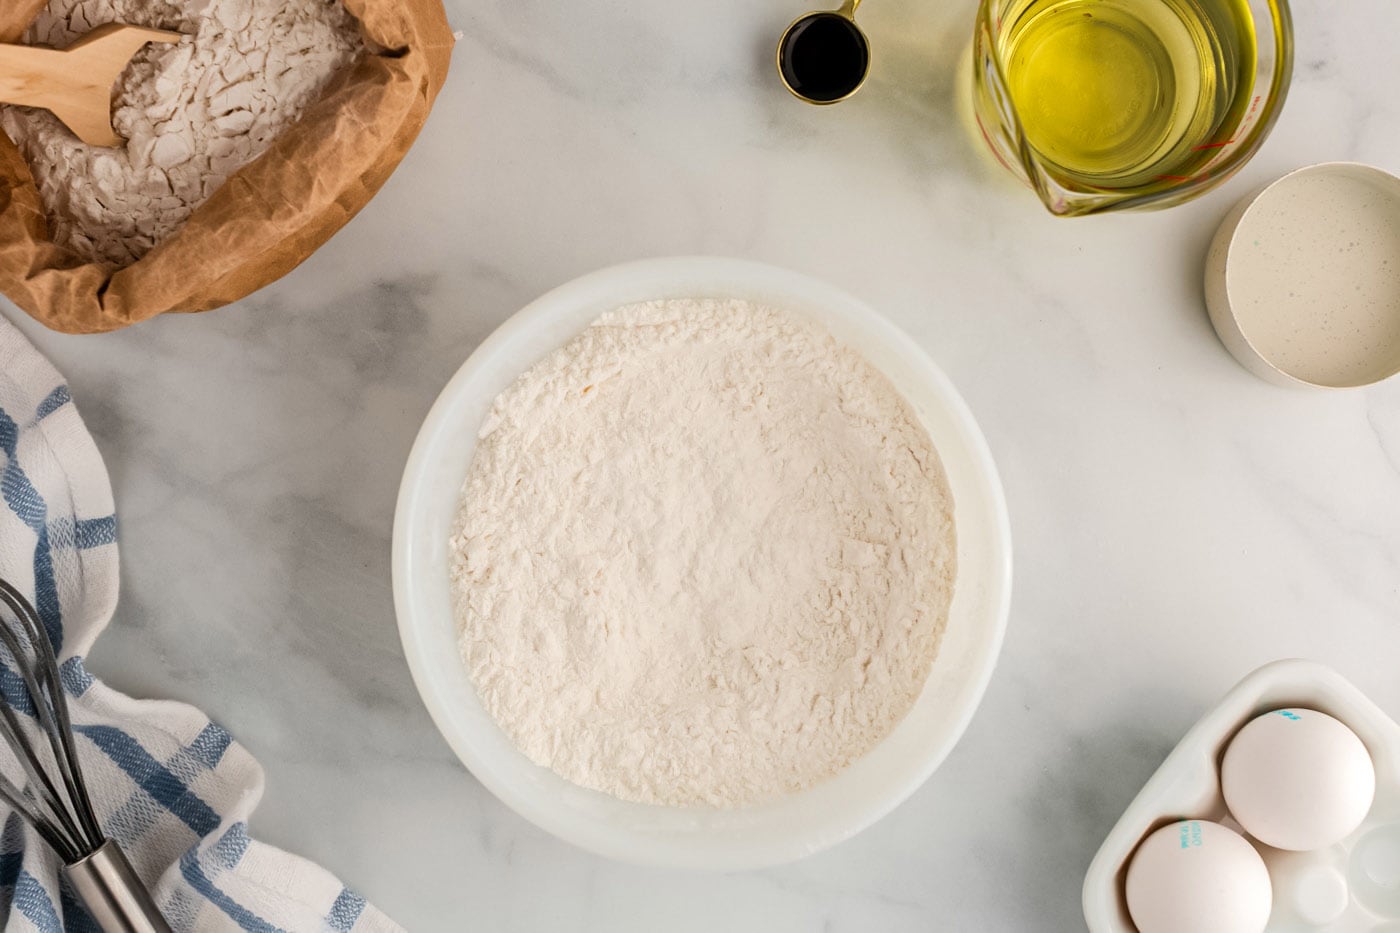 all-purpose flour, granulated sugar, baking powder, and salt whisked in a bowl